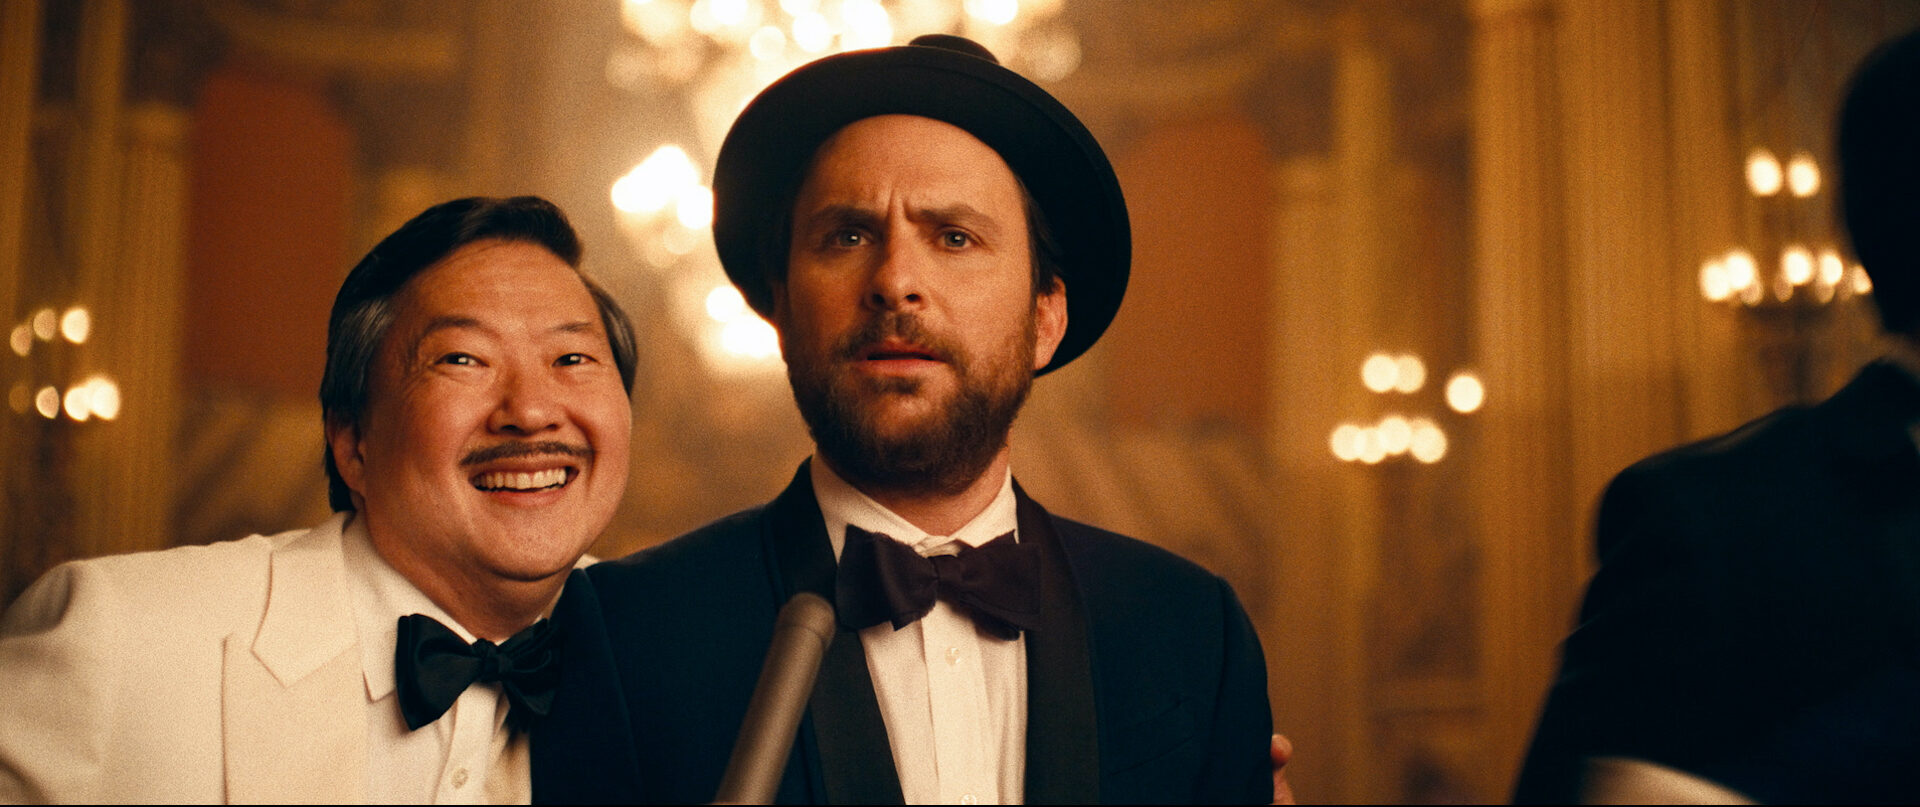 What if someone was able to rise to fame without saying a word? That's the basis for Charlie Day’s 'Fool’s Paradise,' which just released its first trailer.